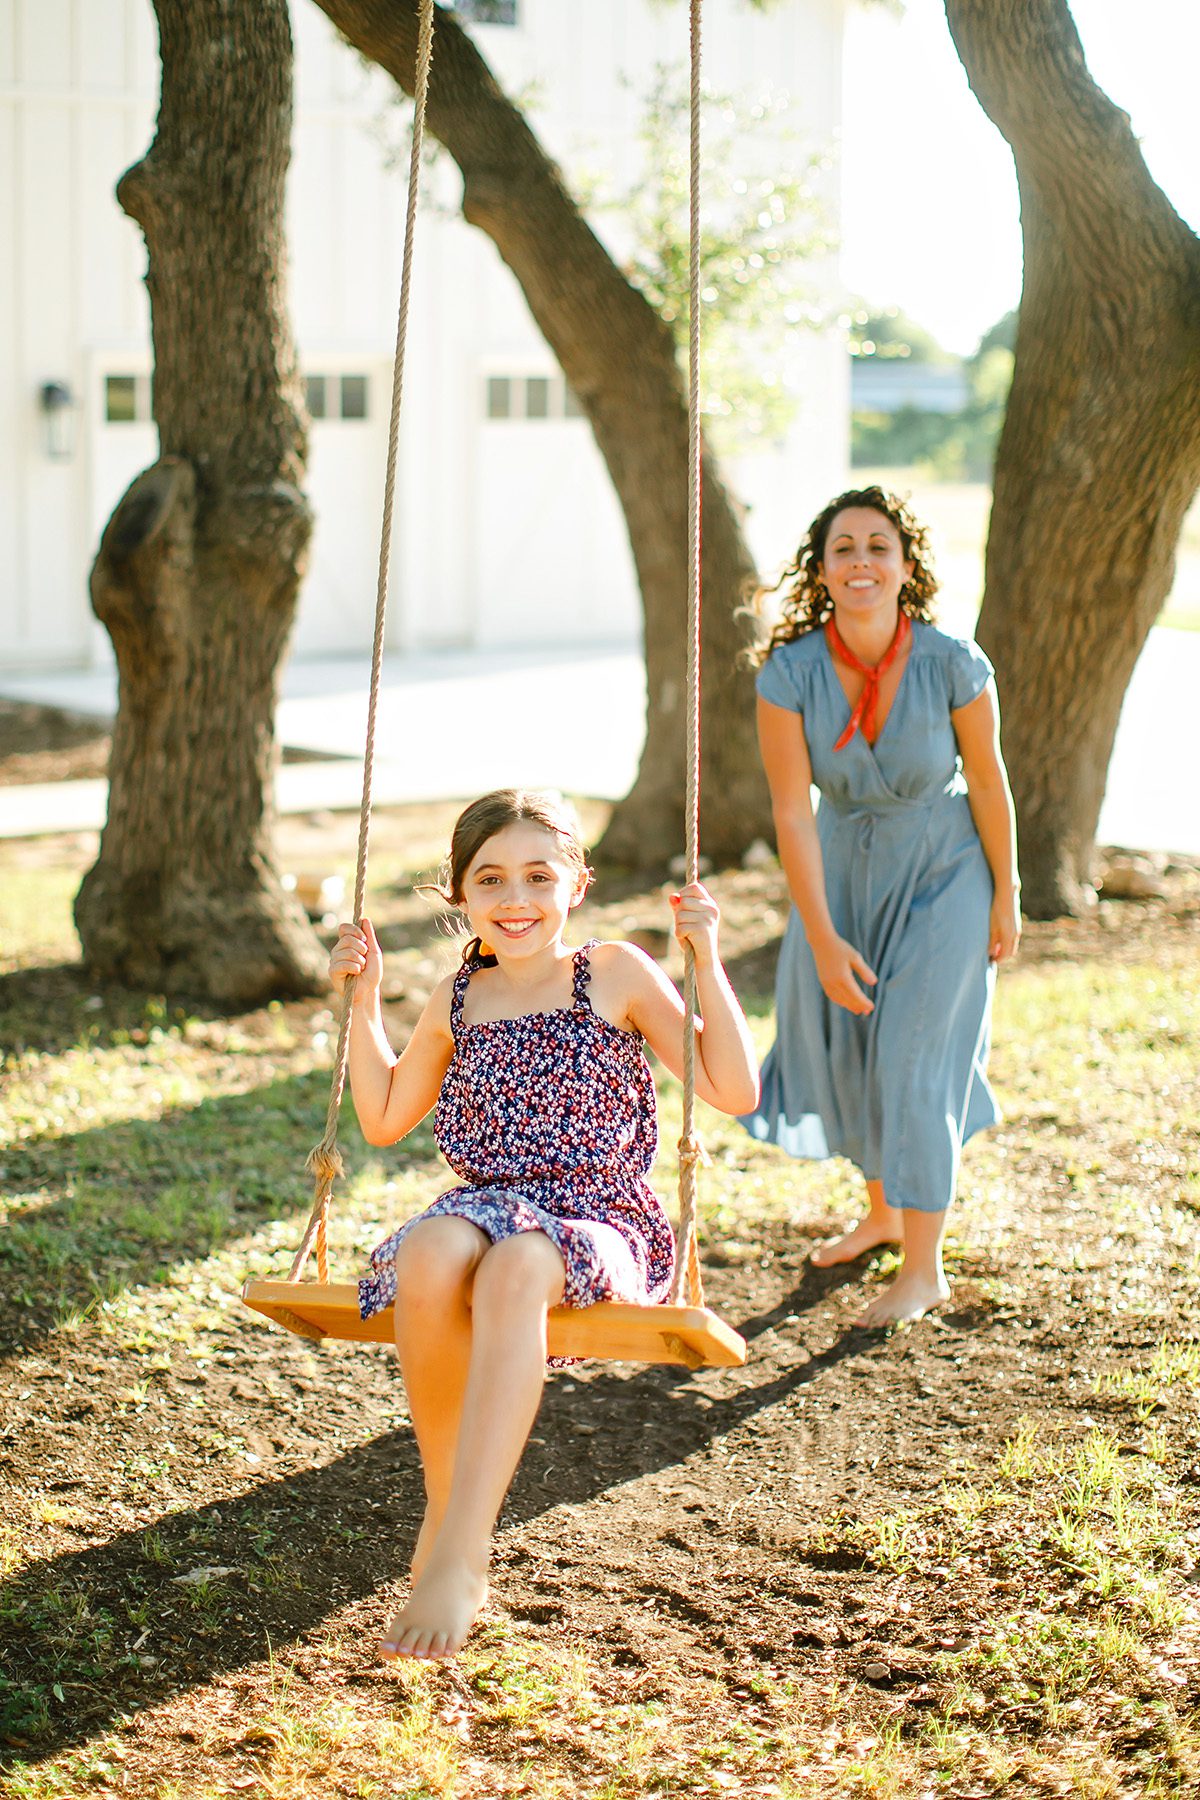 Christina Caster pushing her daughter Blue on a tree swing in Dripping Springs, Texas